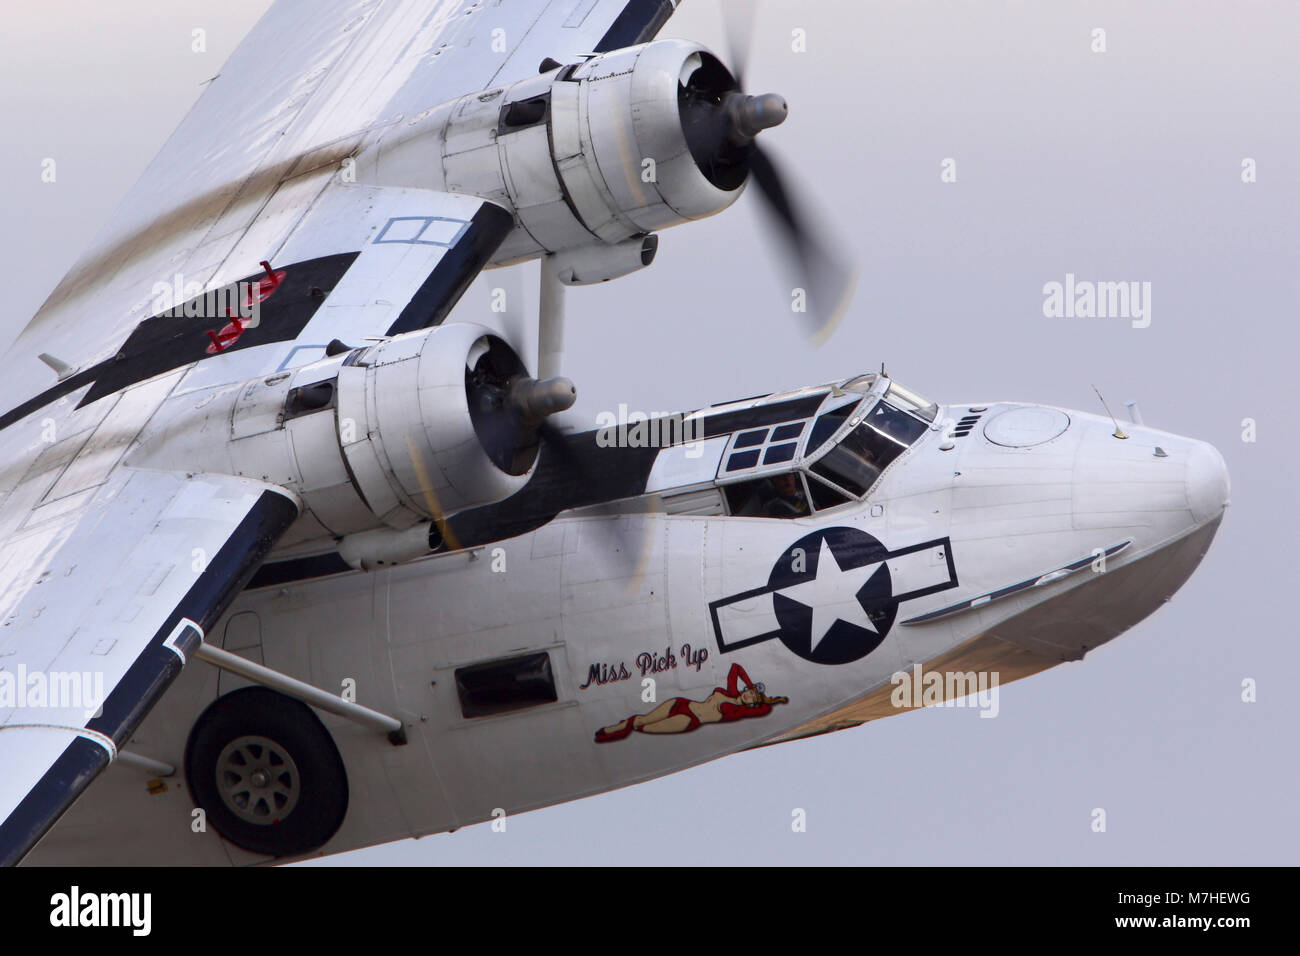 PBY 5A Catalina anti-submarine aircraft of the Russian Air Force. Stock Photo